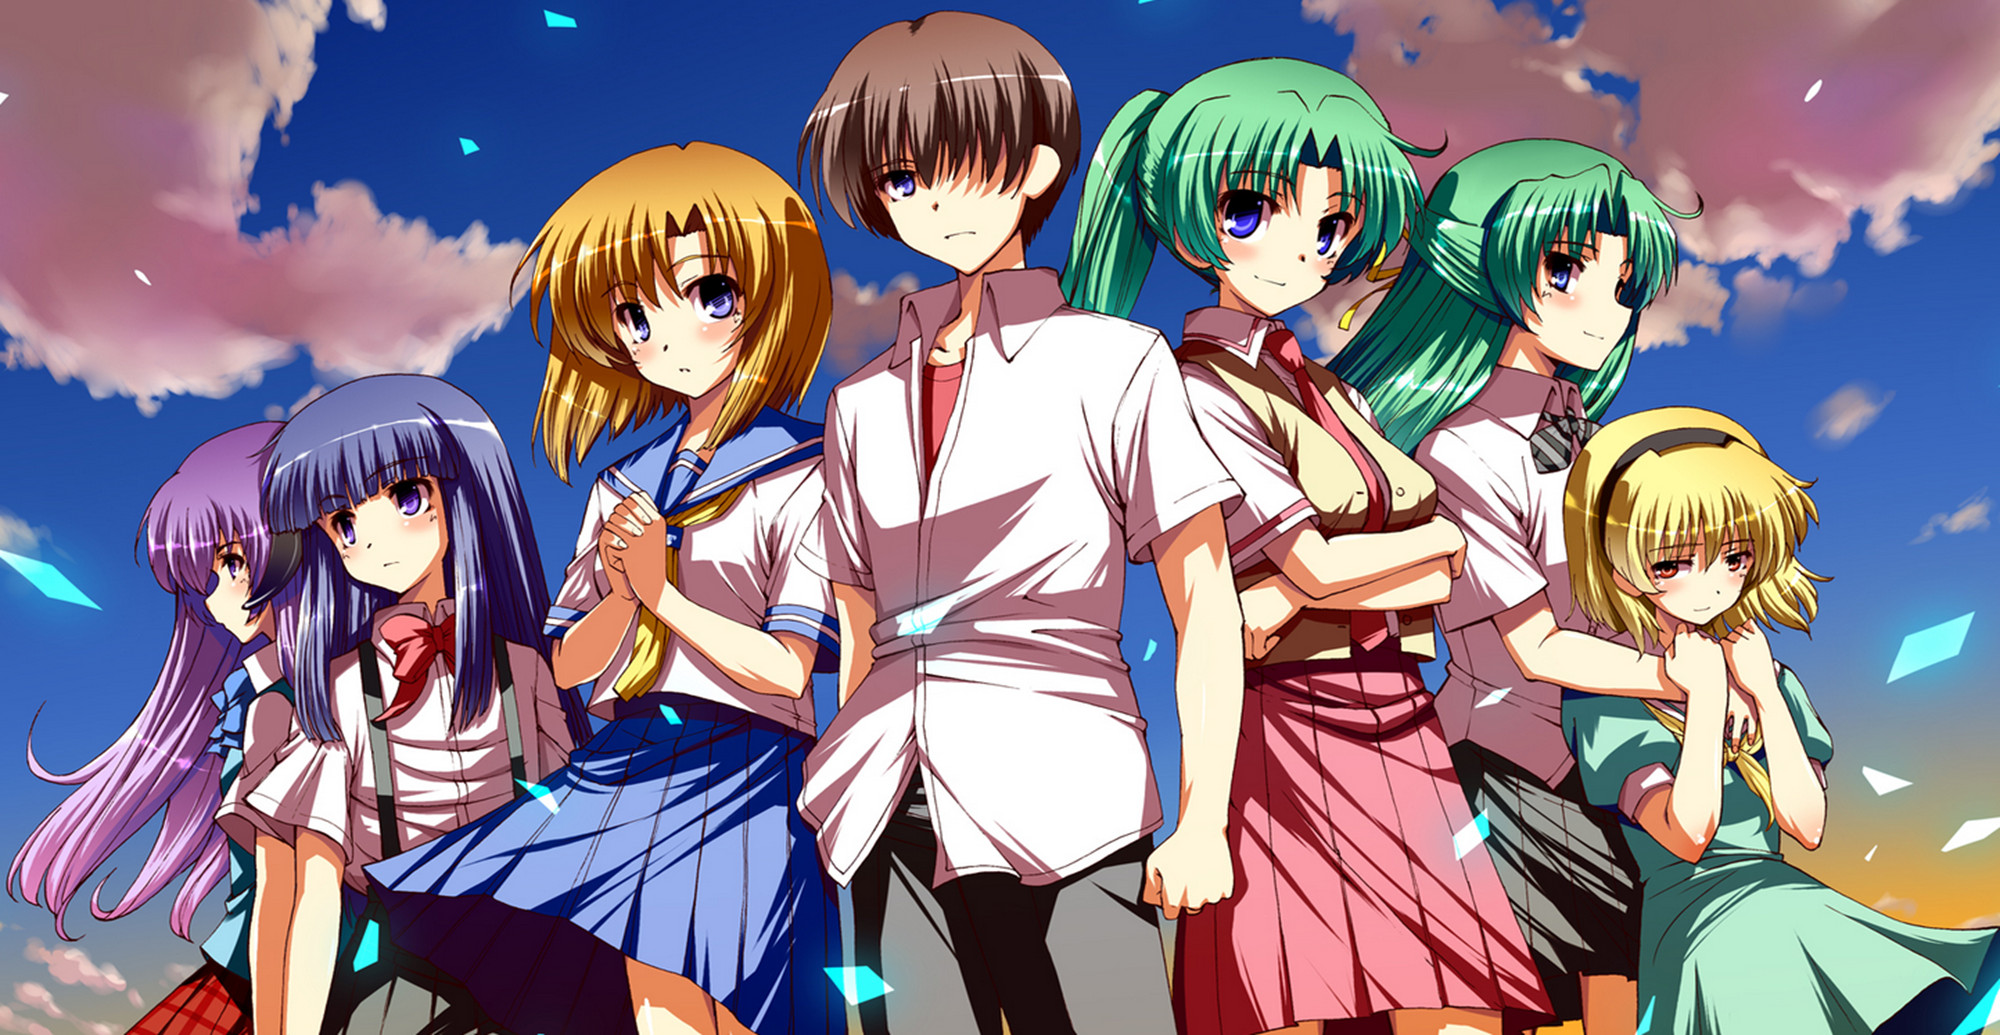 Sentai Filmworks Licenses "Higurashi - When They Cry" and Anime Sequels